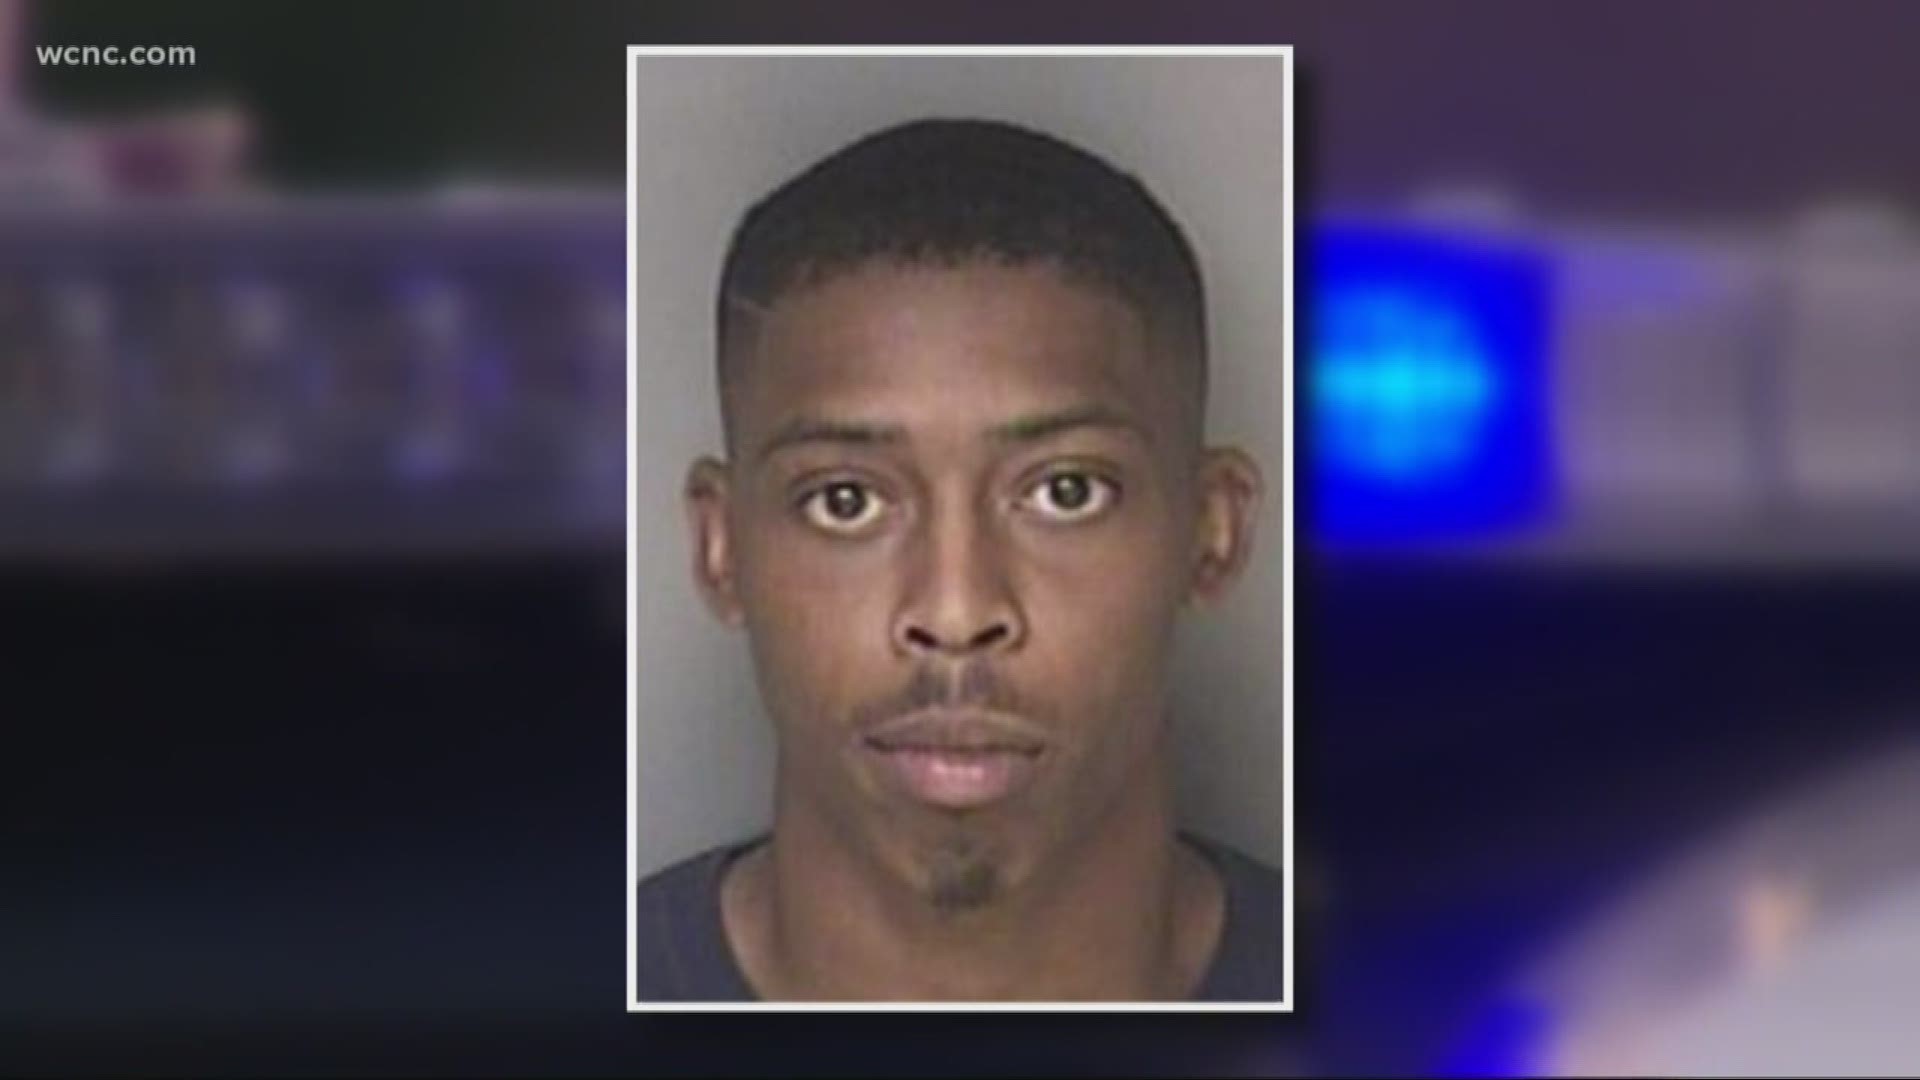 Police say Kelvin Howell met the student while working at Ashbrook High School in Gastonia.